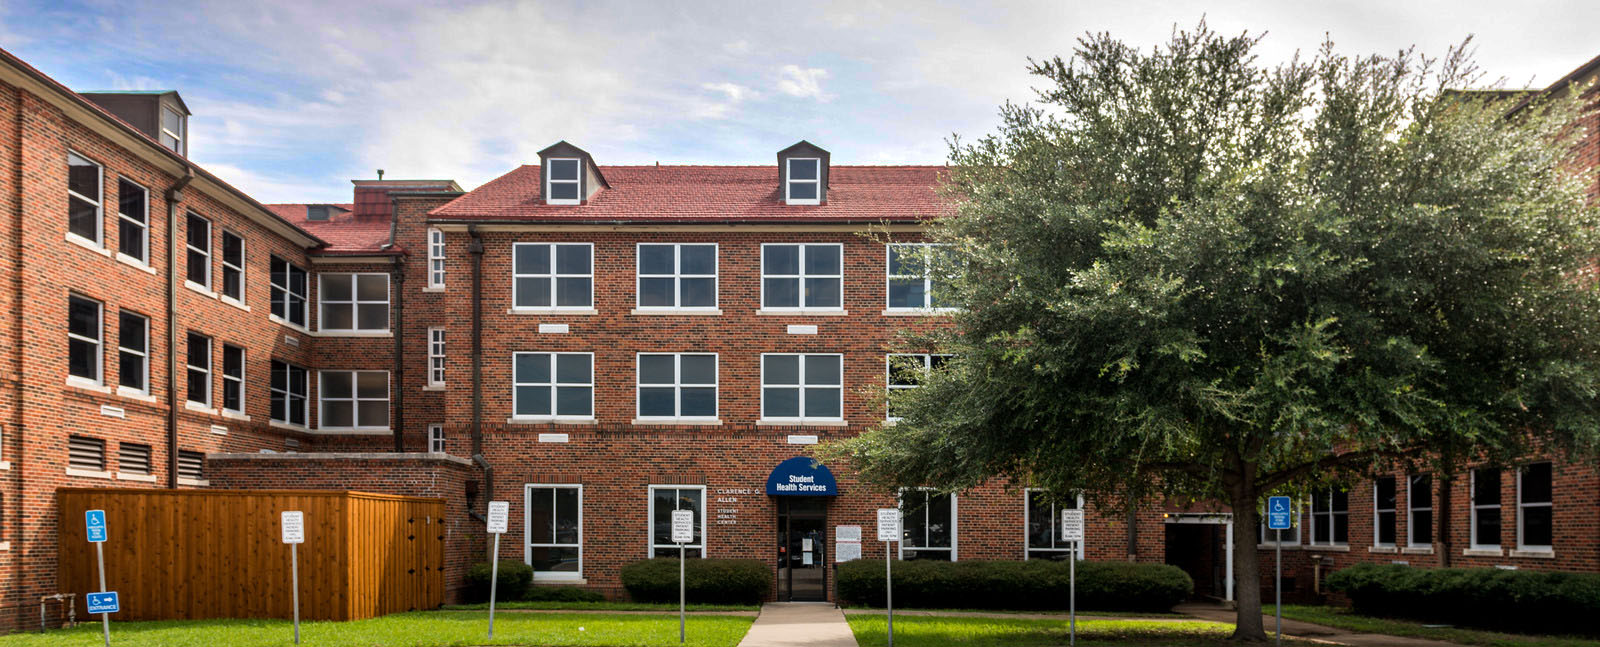 A brick building where the student health services is located.